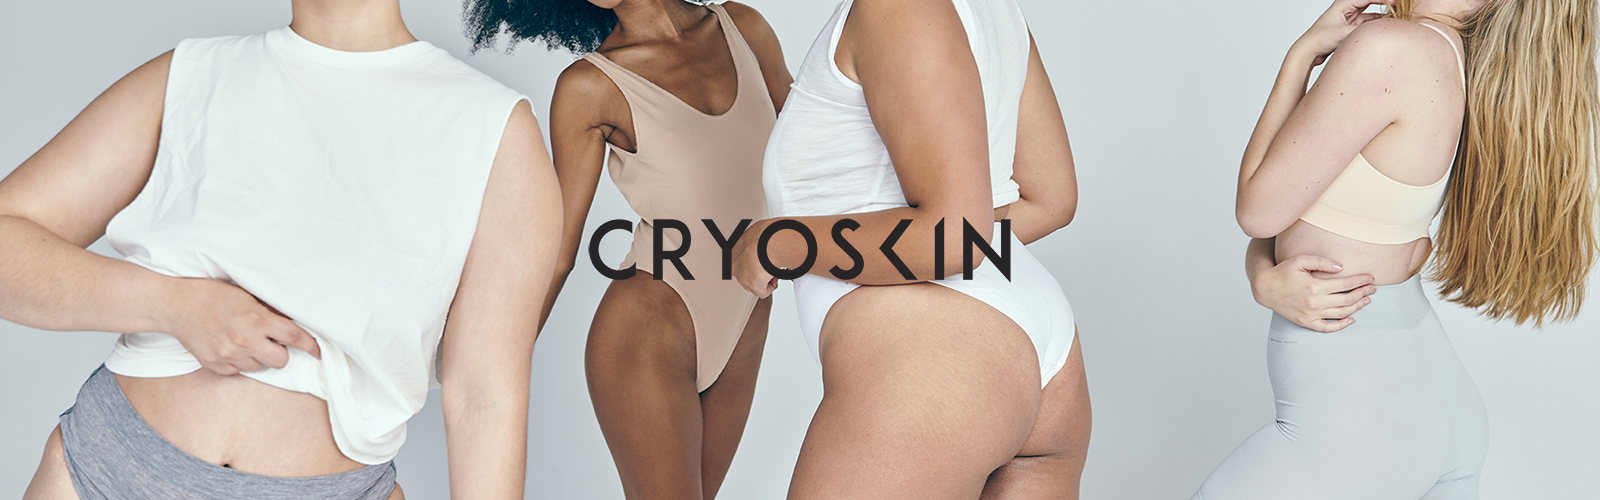 Cryoskin: I Lost 1.5 Inches in 30 Minutes